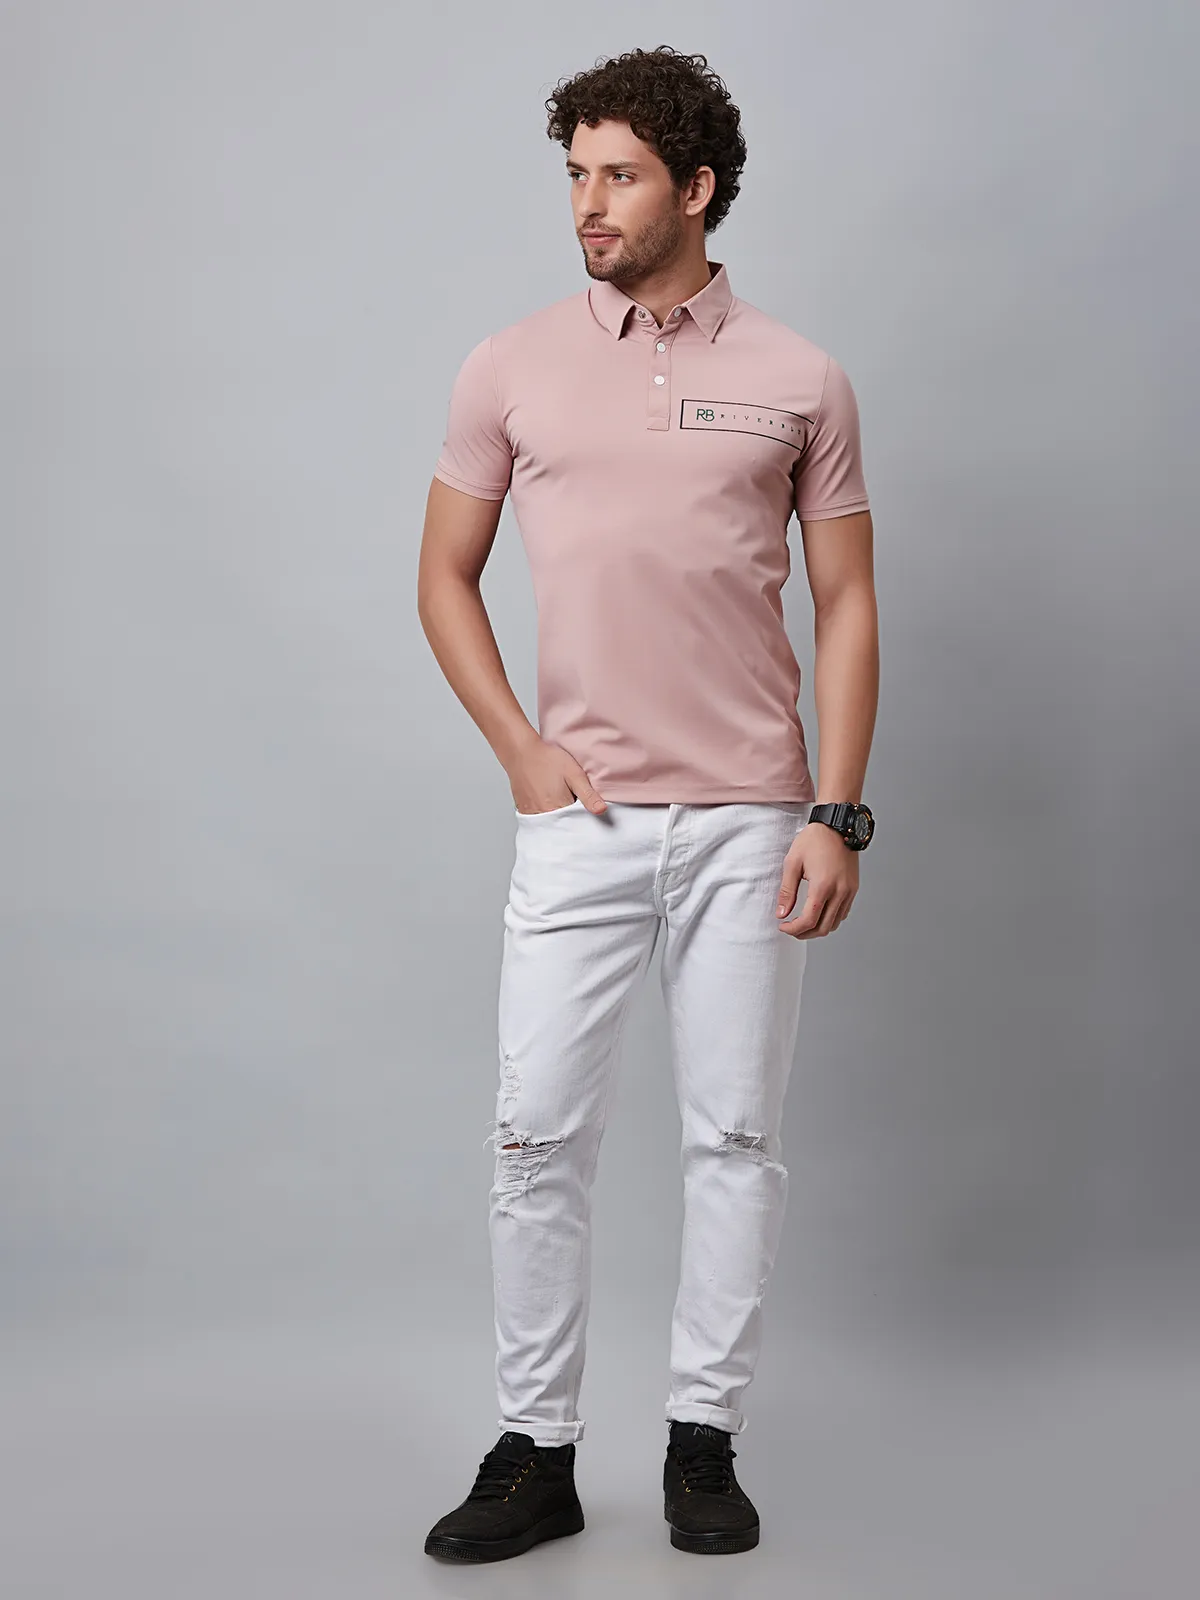 River Blue pink polo t shirt